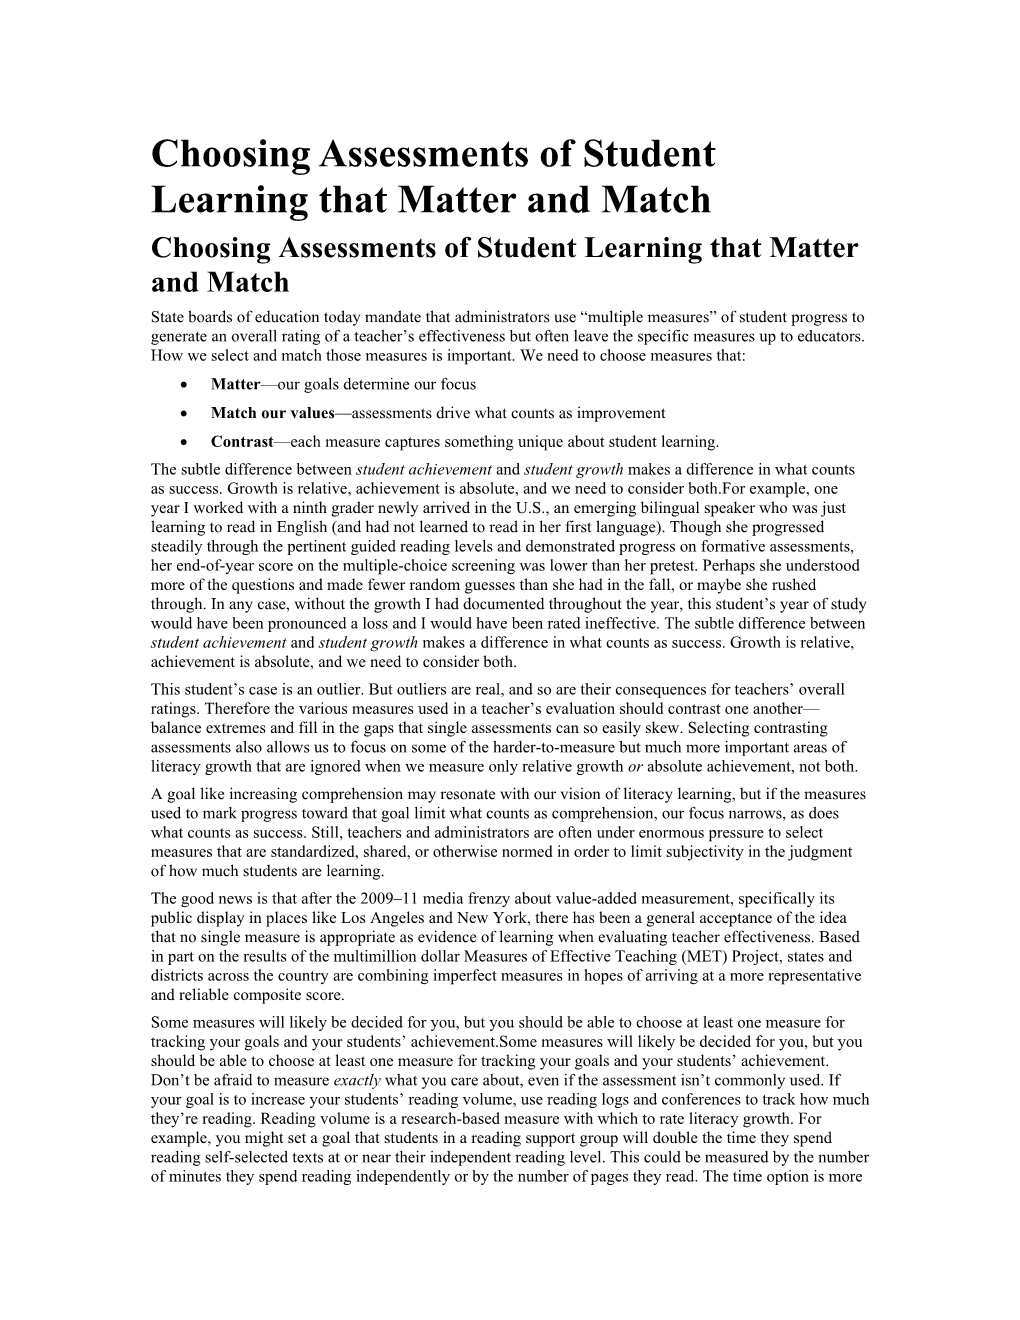 Choosing Assessments of Student Learning That Matter and Match